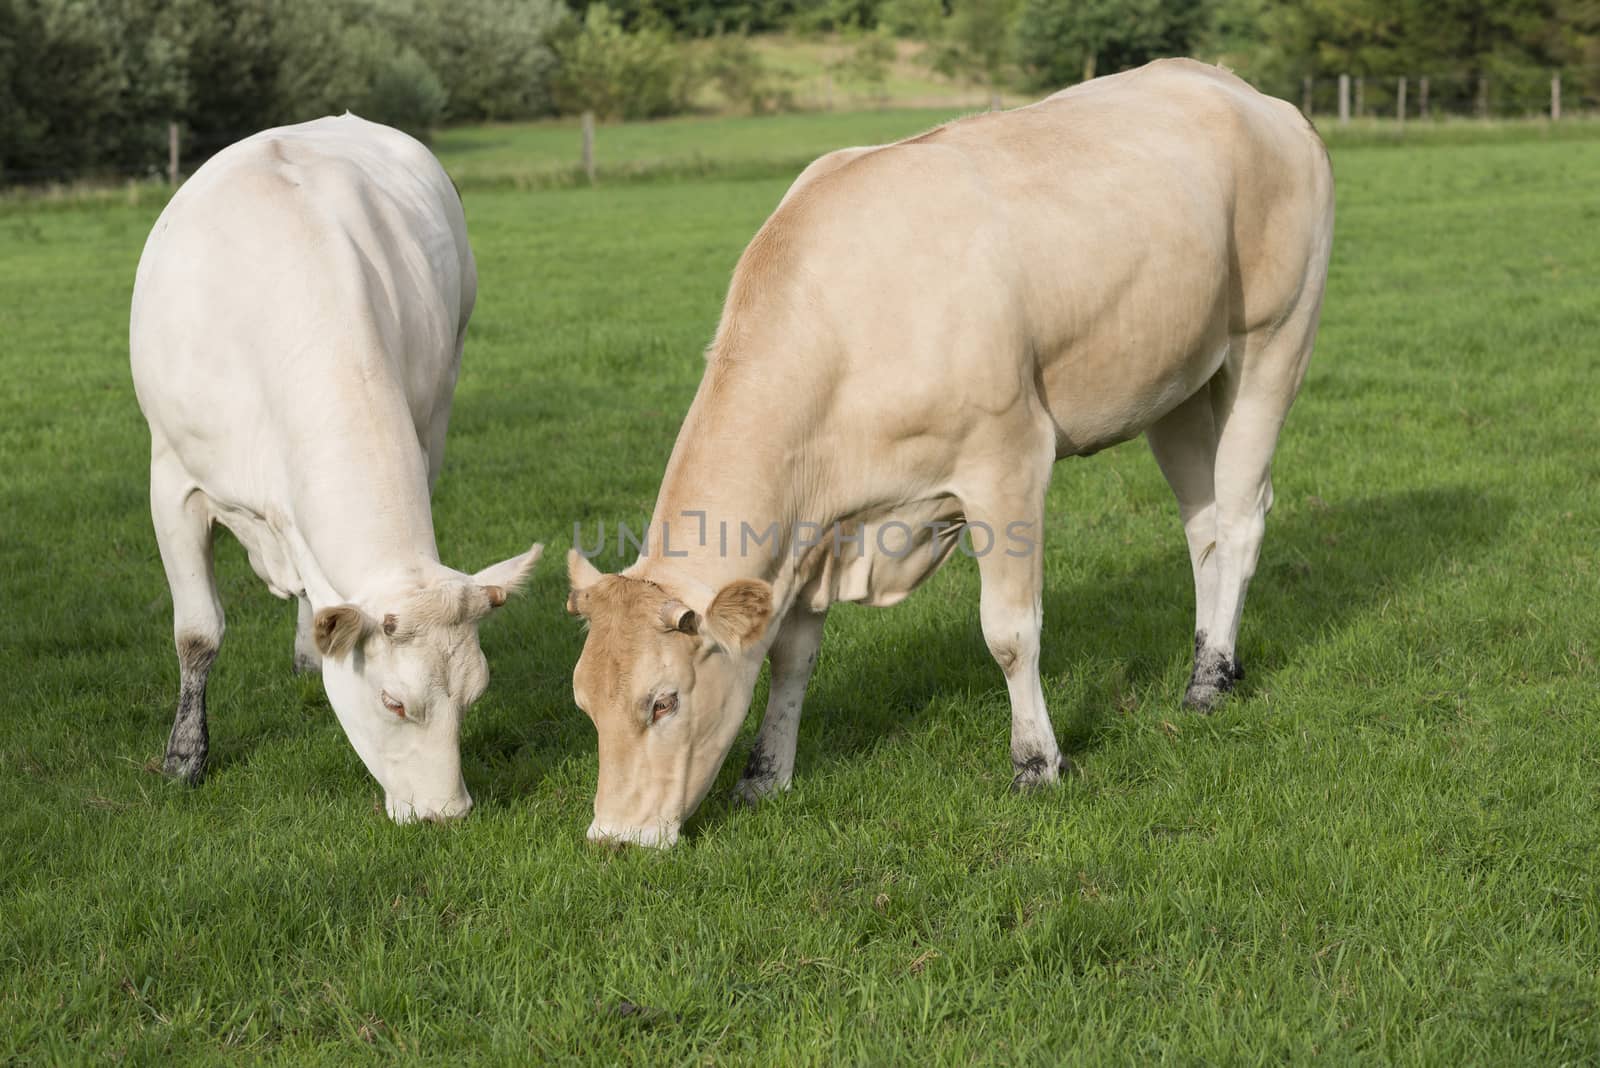 Two light Jersey cows grazing in a pasture in the Netherlands
